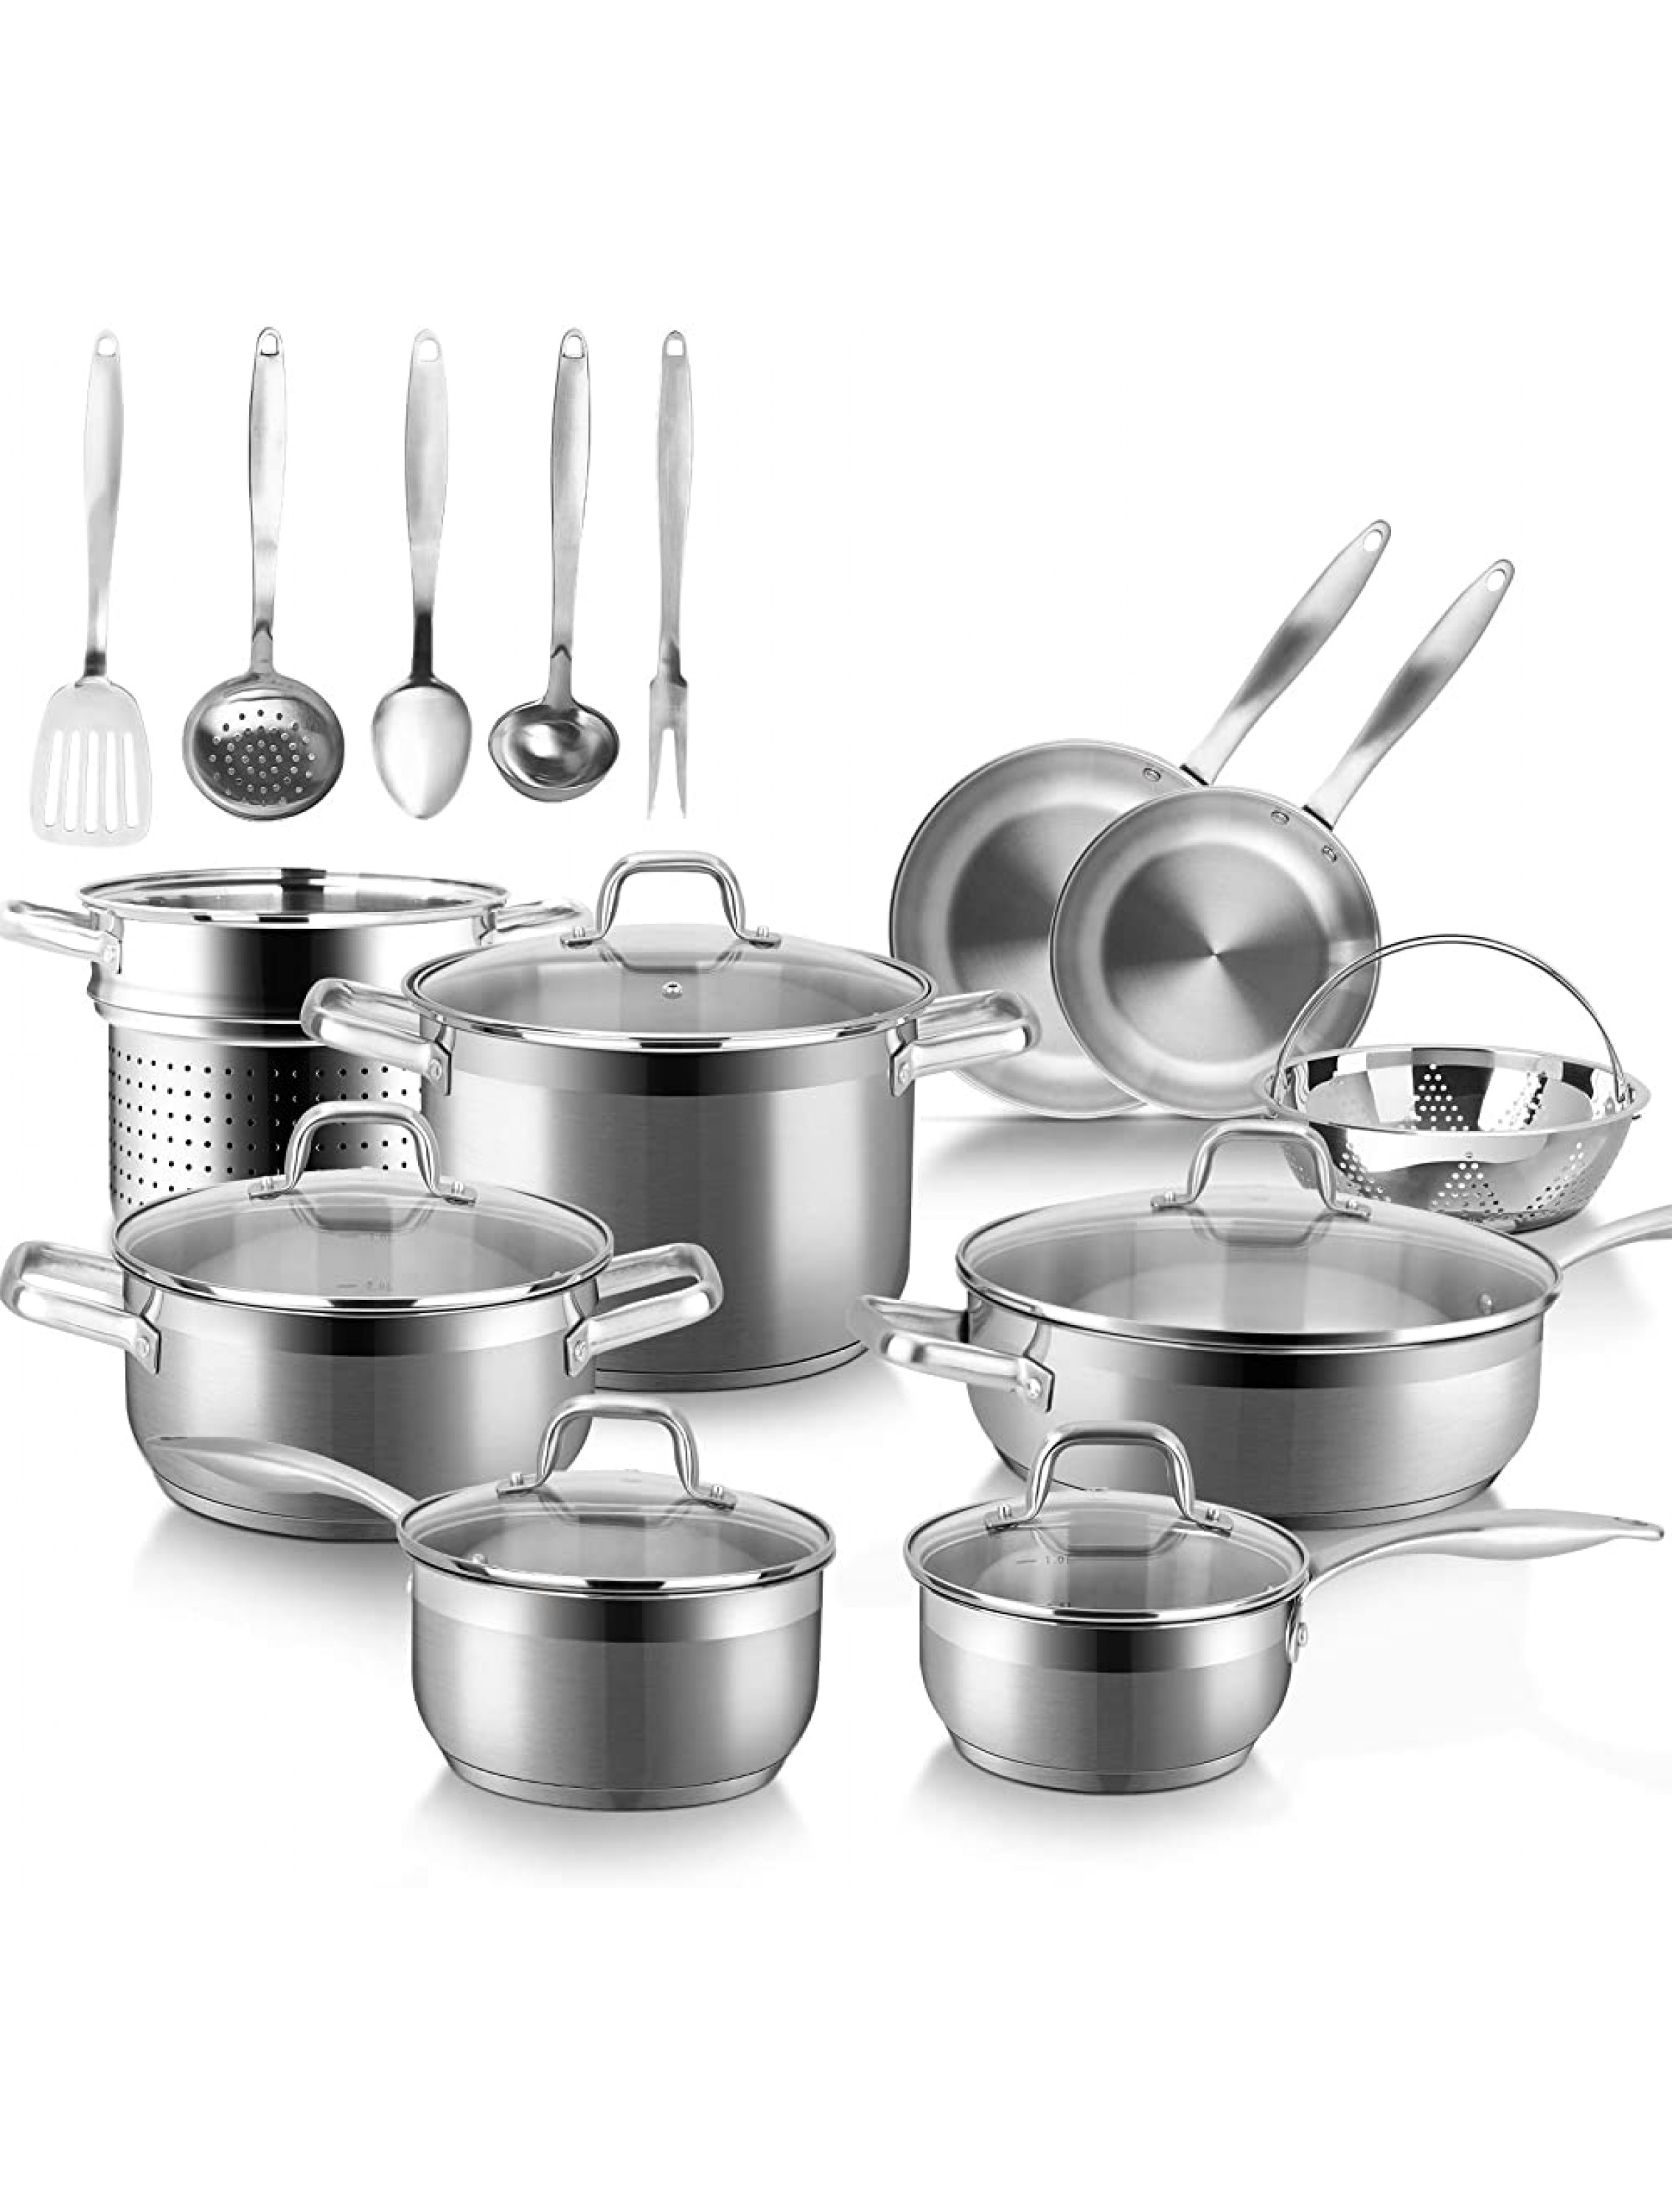 Duxtop Professional Stainless Steel Induction Cookware Set 19PC Kitchen Pots and Pans Set Heavy Bottom with Impact-bonded Technology - BP2MDDHIE